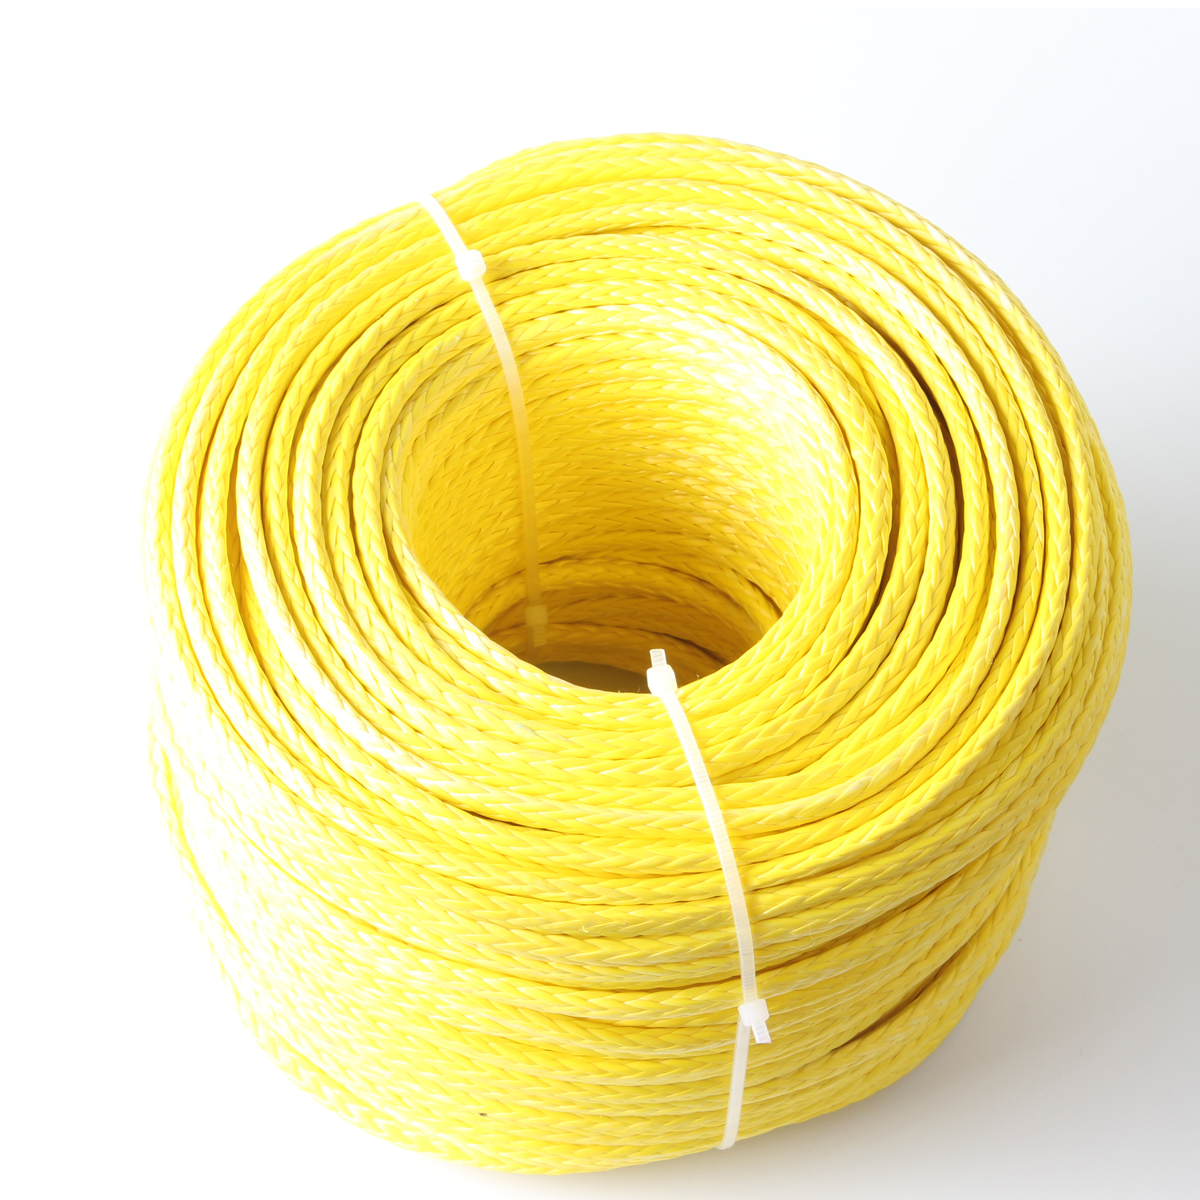 4mm 5/32" UHMWPE Braided Rudder Line For Sailboat